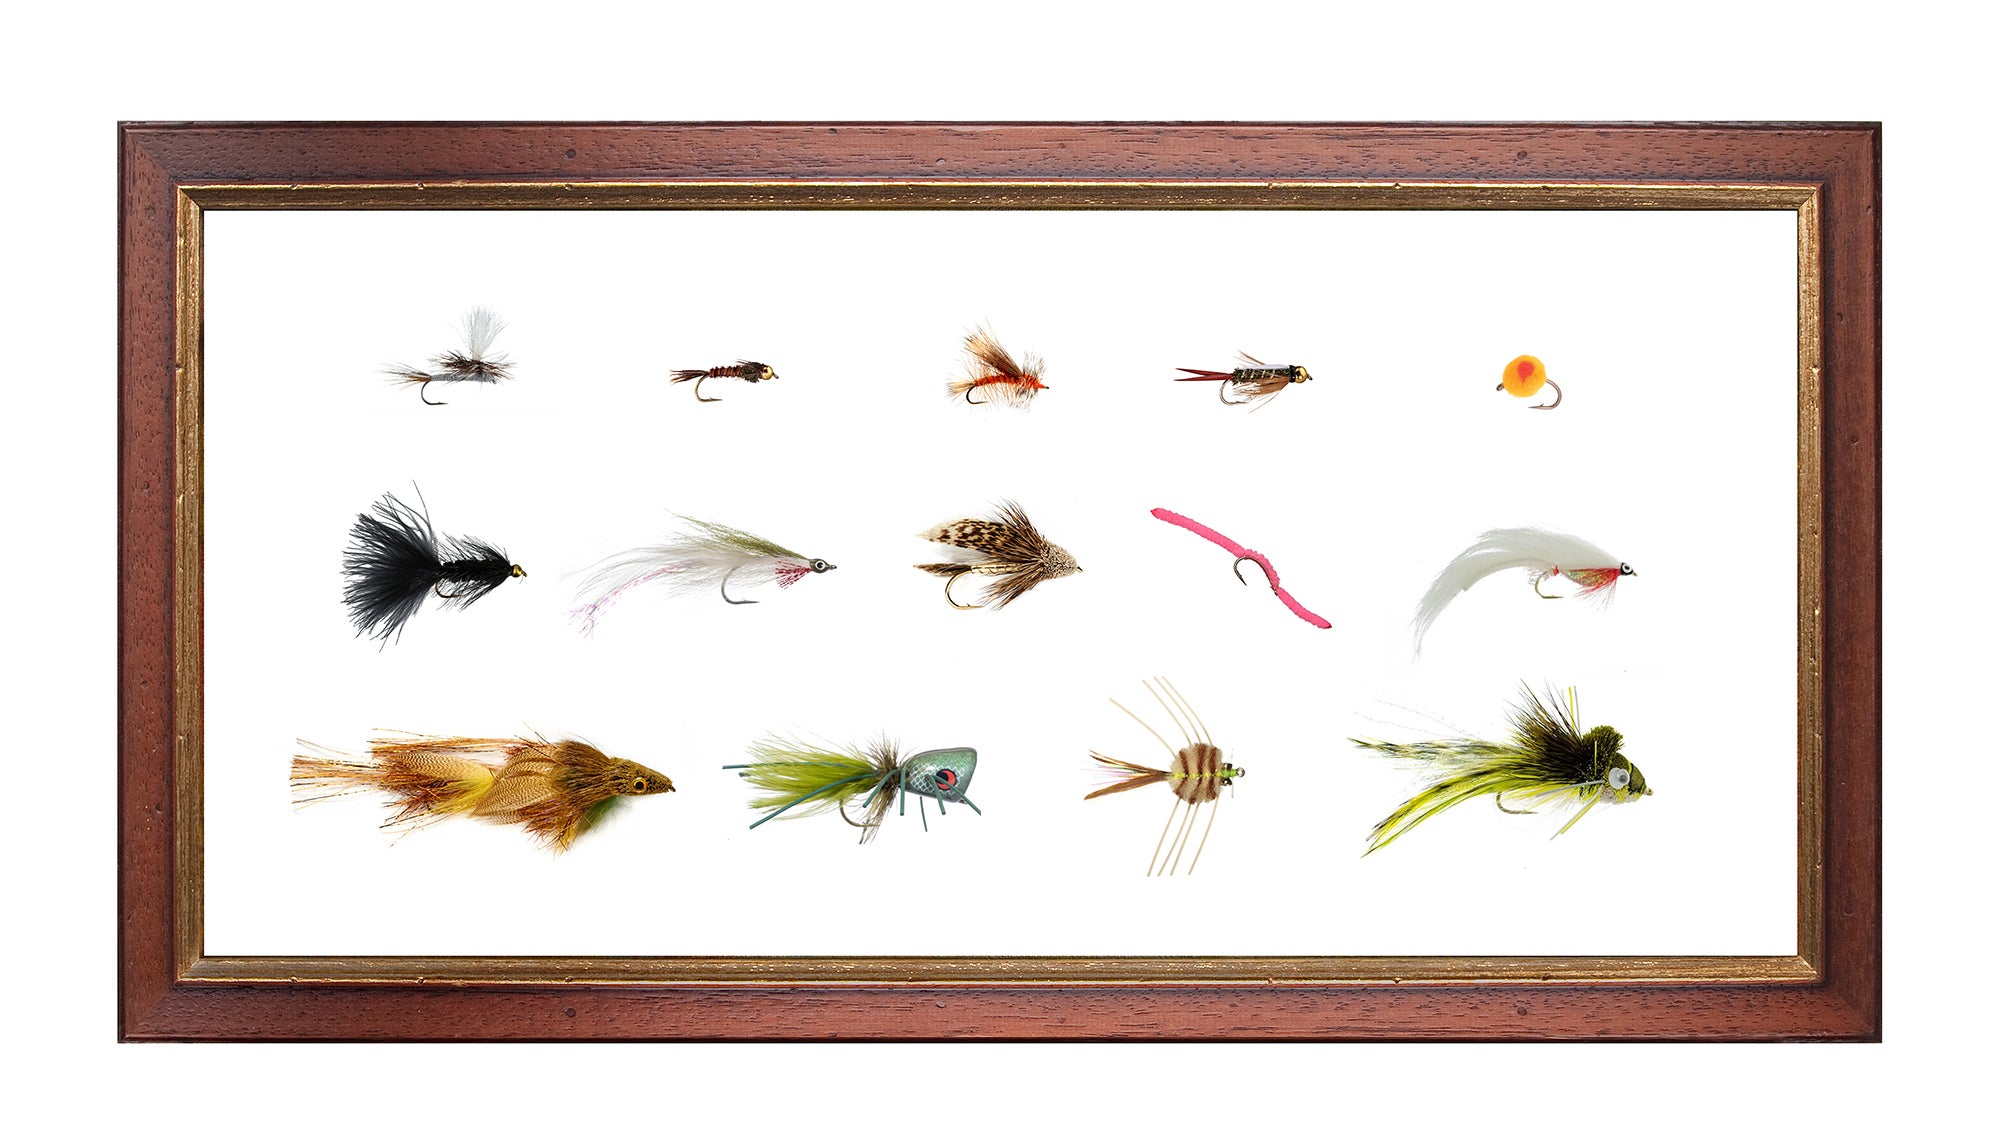 Flies for everything! – Fly and Flies